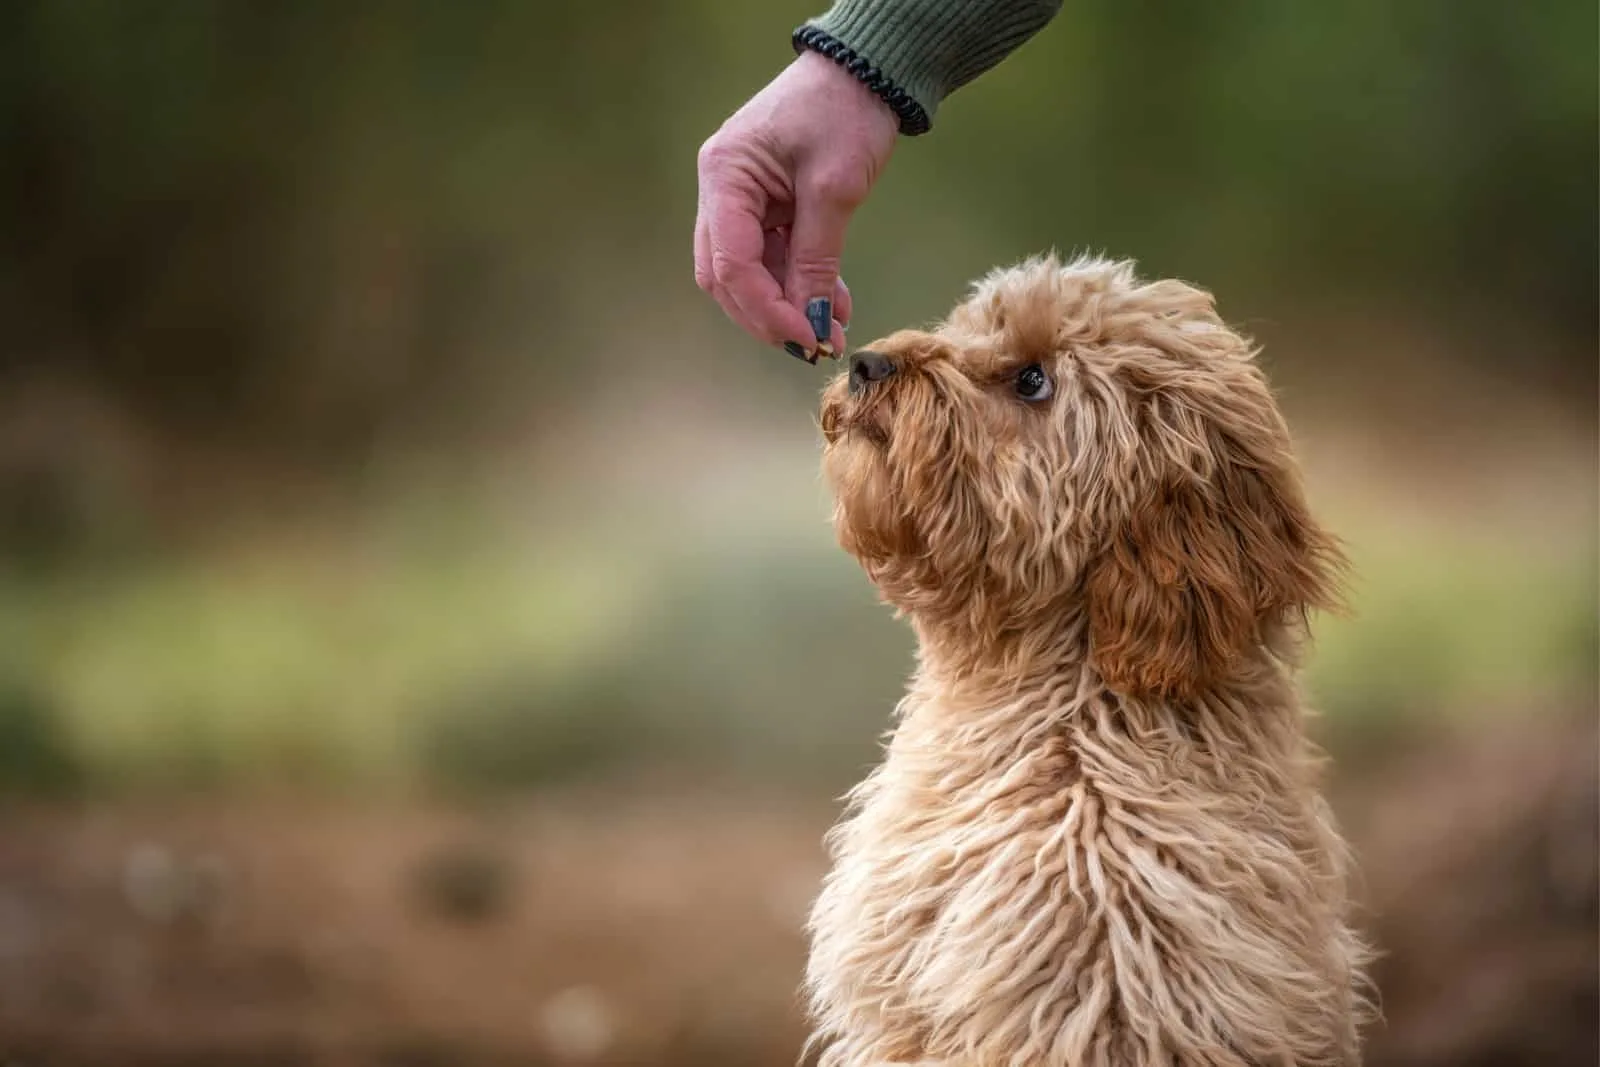 Six month old Cavapoo puppy dog smelling a treat held by her owner